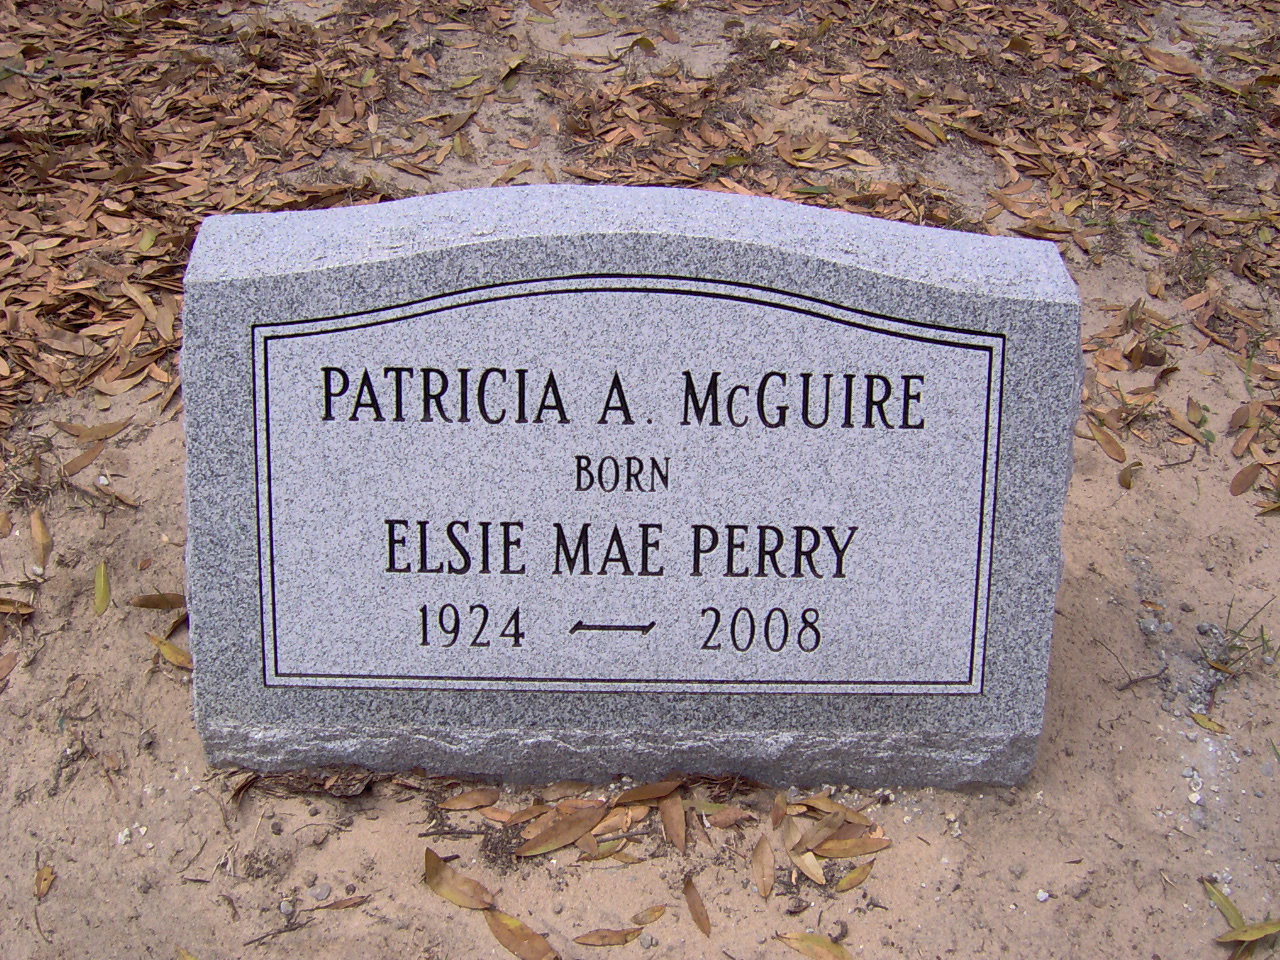 Headstone for McGuire, Patricia A